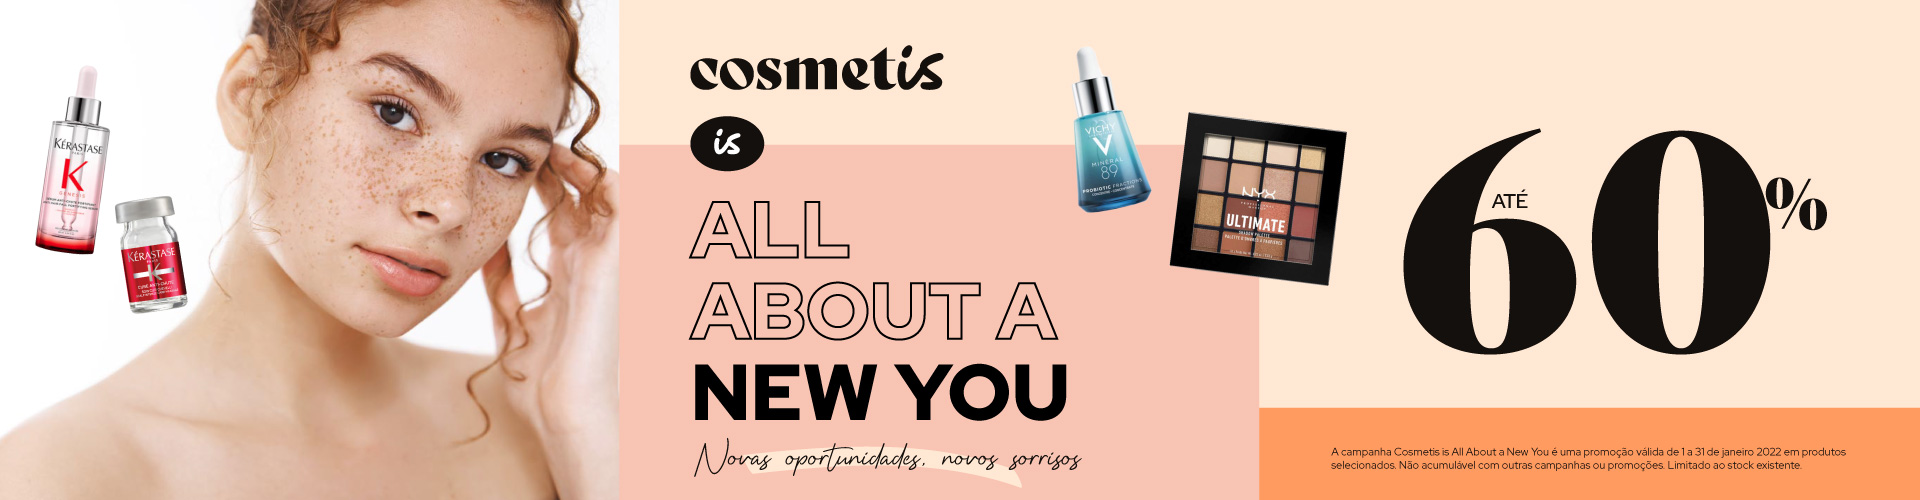 Cosmetis is All About New You